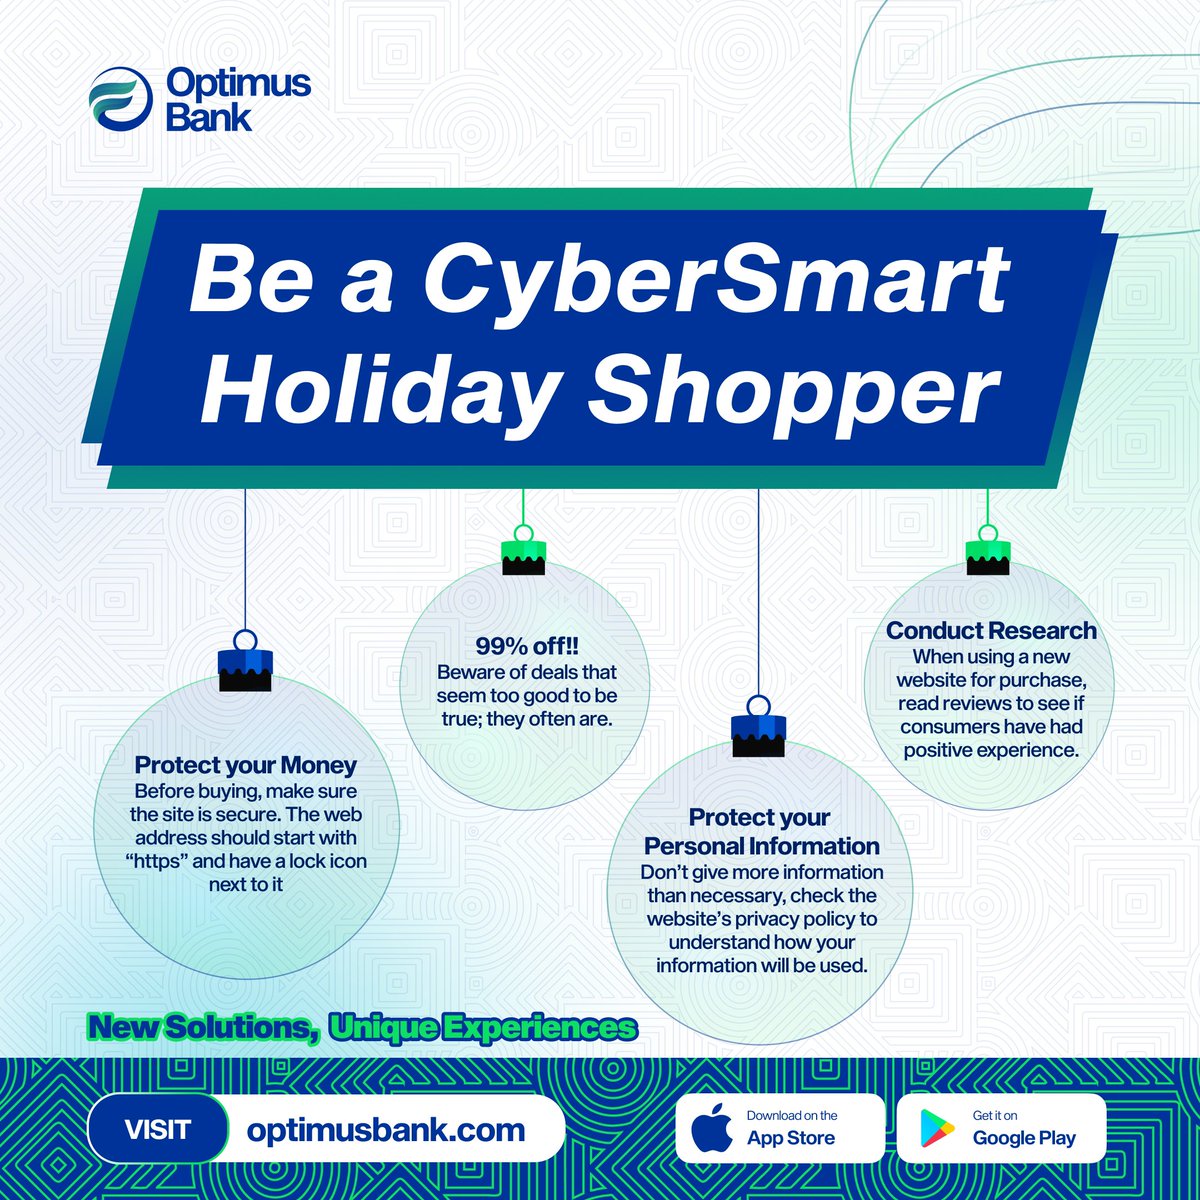 ‘Tis the season to be CyberSmart! ​

Shop with confidence and secure your holiday purchases both offline and online. ​

For more enquiries, visit optimusbank.com, you can also contact us by sending a mail to opticonnect@optimusbank.com. ​

#OptimusBank #BankingMadeEasy